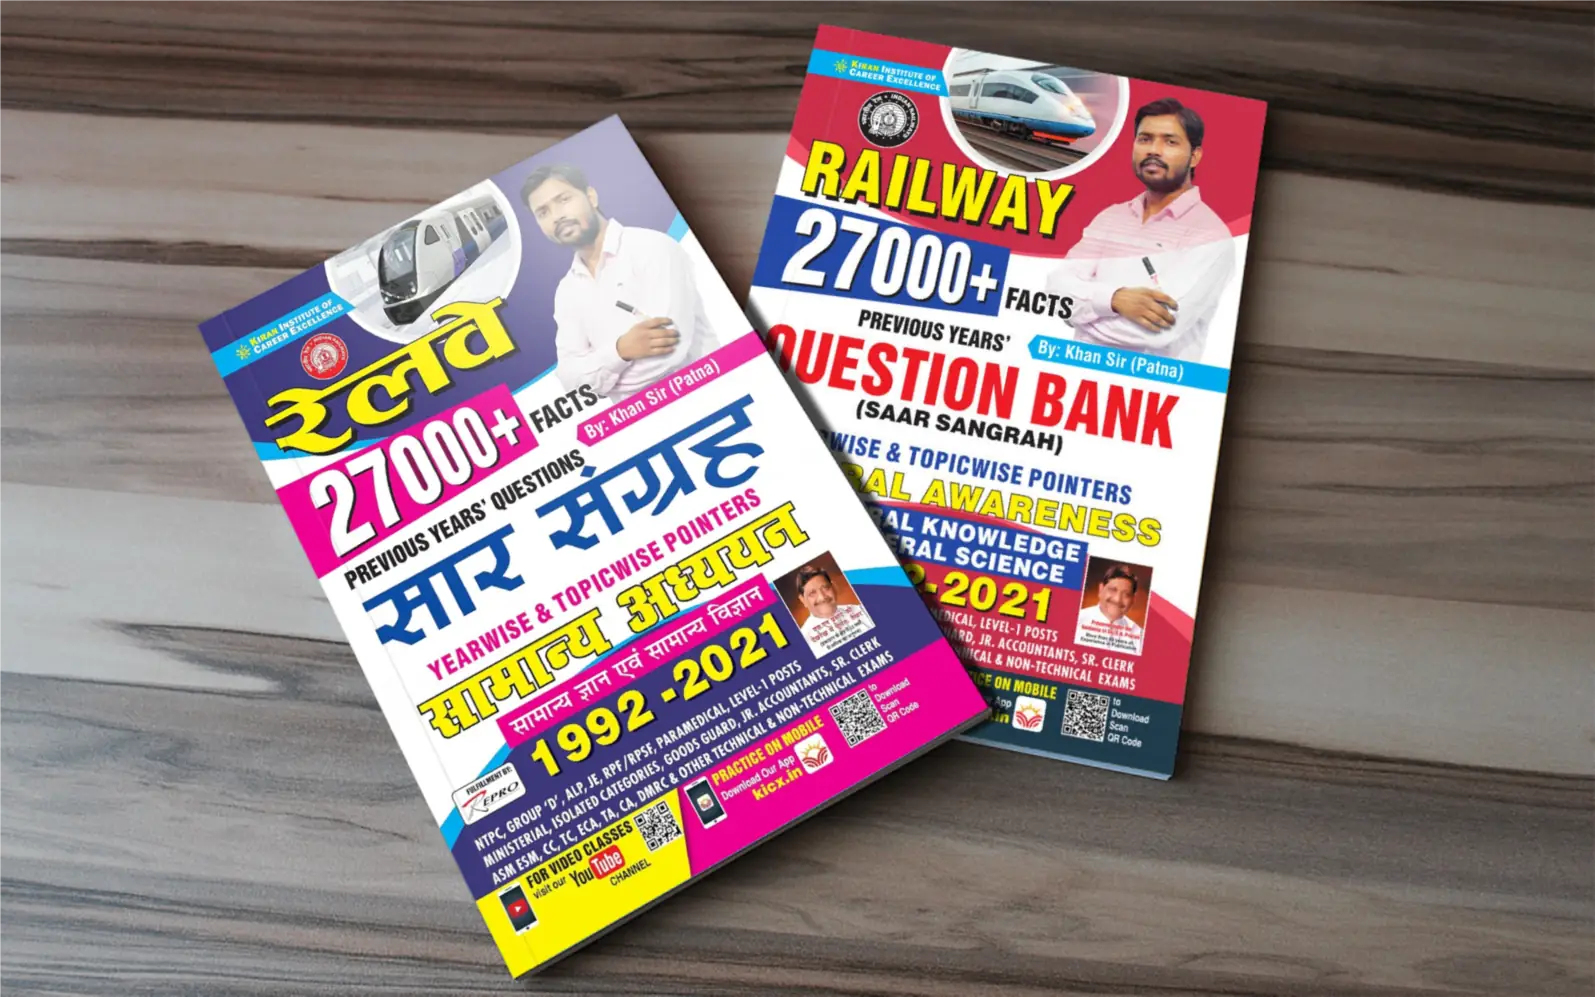 Kiran Railways 27000+ Facts Previous Year's Question Bank - General Awareness PDF [2022 Edition]